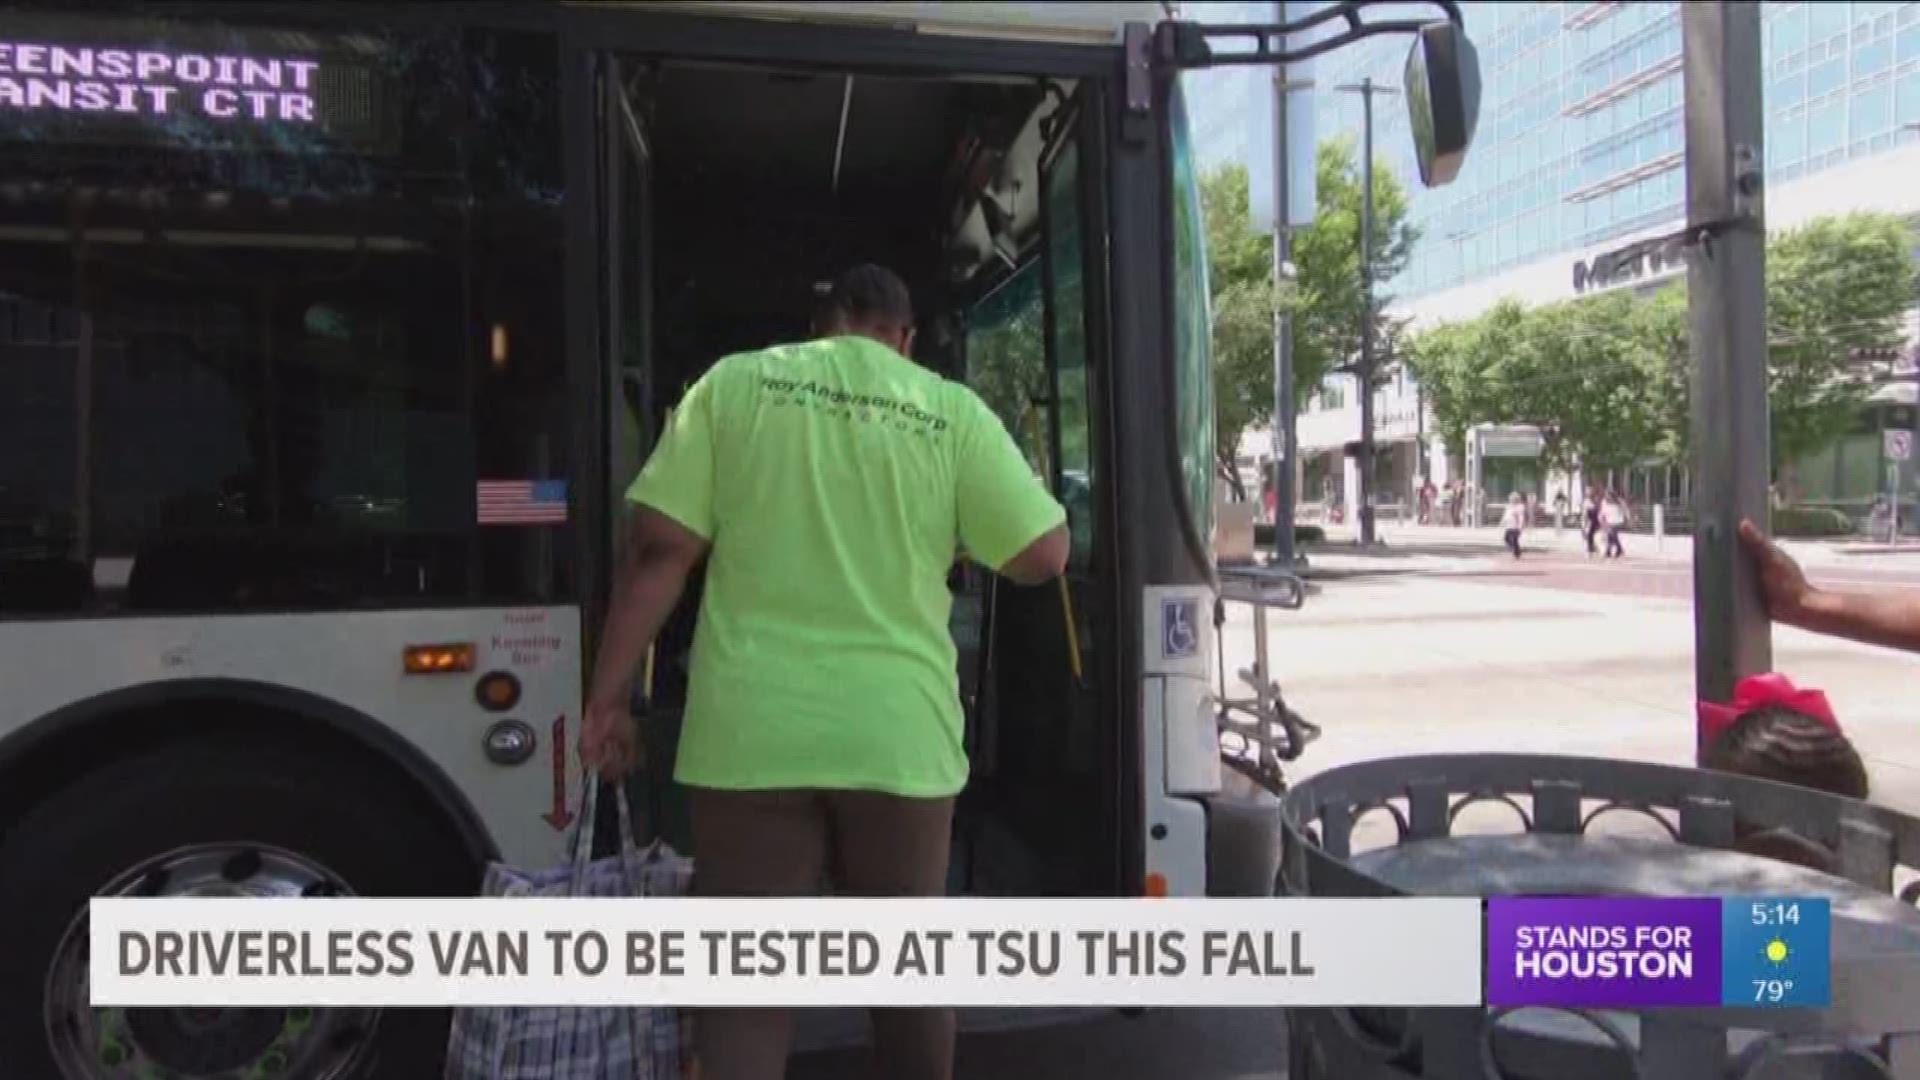 Houston METRO will be testing a driverless van at Texas Southern University as early as this fall.